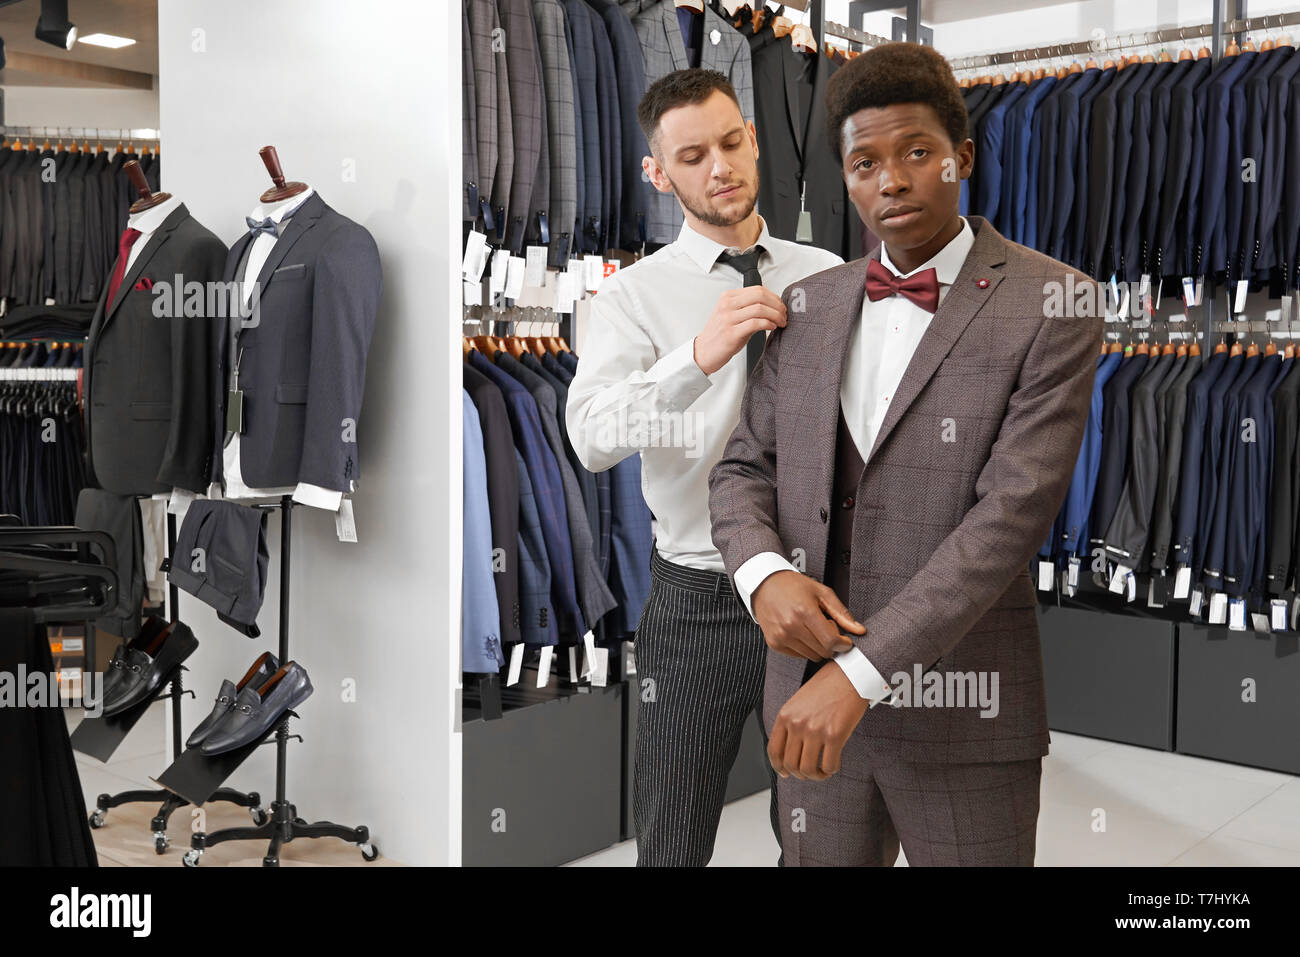 Assistant of fashionable boutique trying on and choosing suit for young client. Man in white shirt and suit looking at camera. Stylish showroom with clothing for successful men. Stock Photo